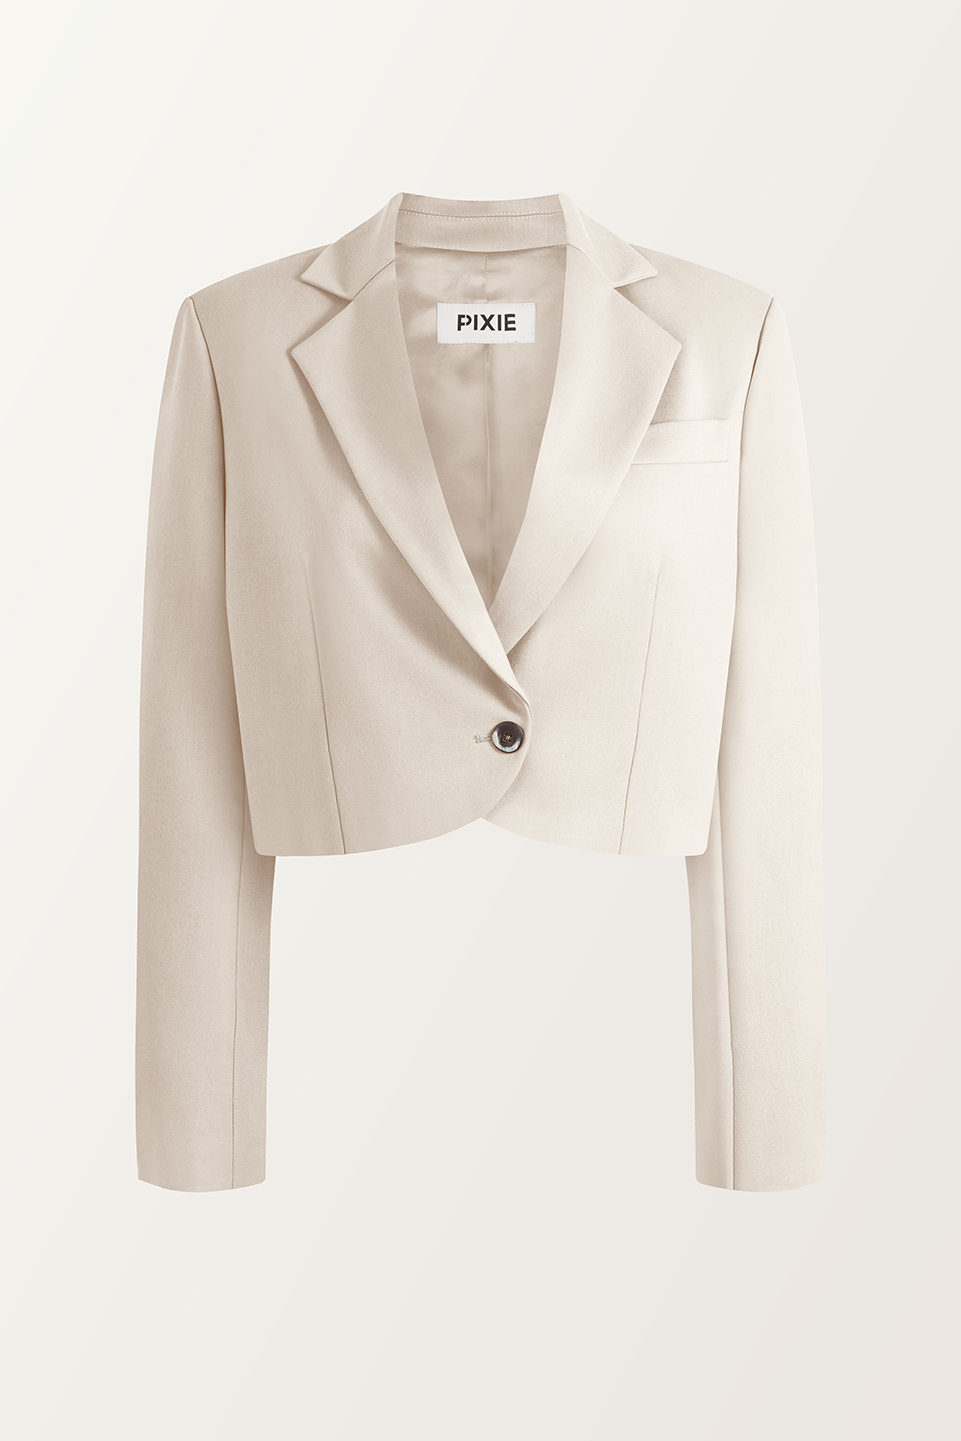 PIXIE WON'T PLAY JULY CROP JACKET WHITE ECRU WARM STYLISH WOOL SILK FABRIC CLASSIC DESIGN VERSATILE PROFESSIONAL ATTIRE SPRING SUMMER FALL WINTER FASHION SOPHISTICATED BUSINESS CASUAL FASHION - FORWARDS TIMELESS WARDROBE STAPLE SUSTAINABLE LUXURY CAPSULE COLLECTION ESSENTIALS ELEGANT CLEAN LINES ACCENTUATED SHOULDERS SLIGHTLY OVERSIZED CROPPED LENGTH BLAZER